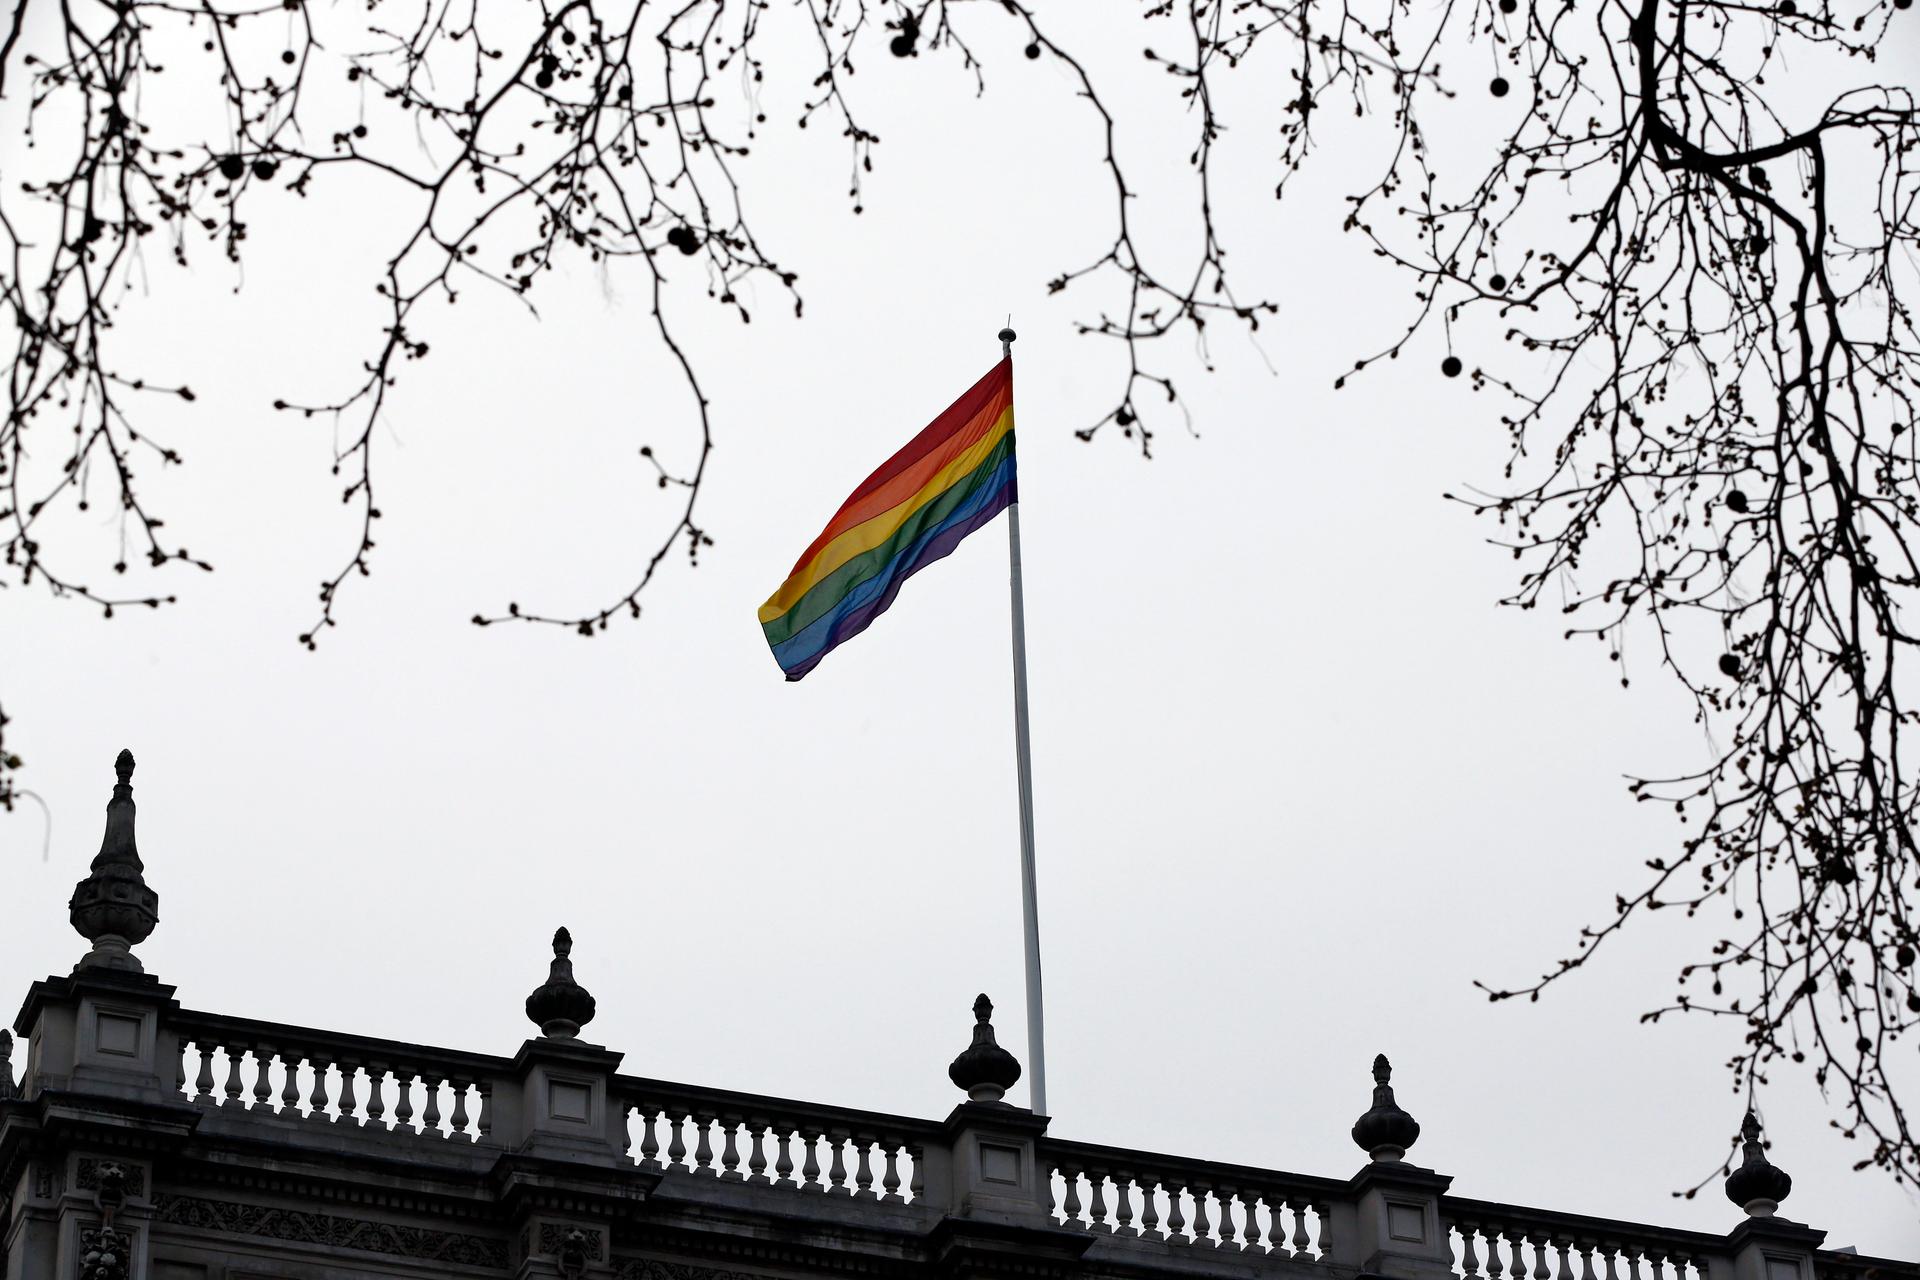 The rainbow flag, a symbol of the lesbian, gay, bisexual, and transgender community, flies over the British Government Cabinet Offices building, in central London, Friday, March 28, 2014.